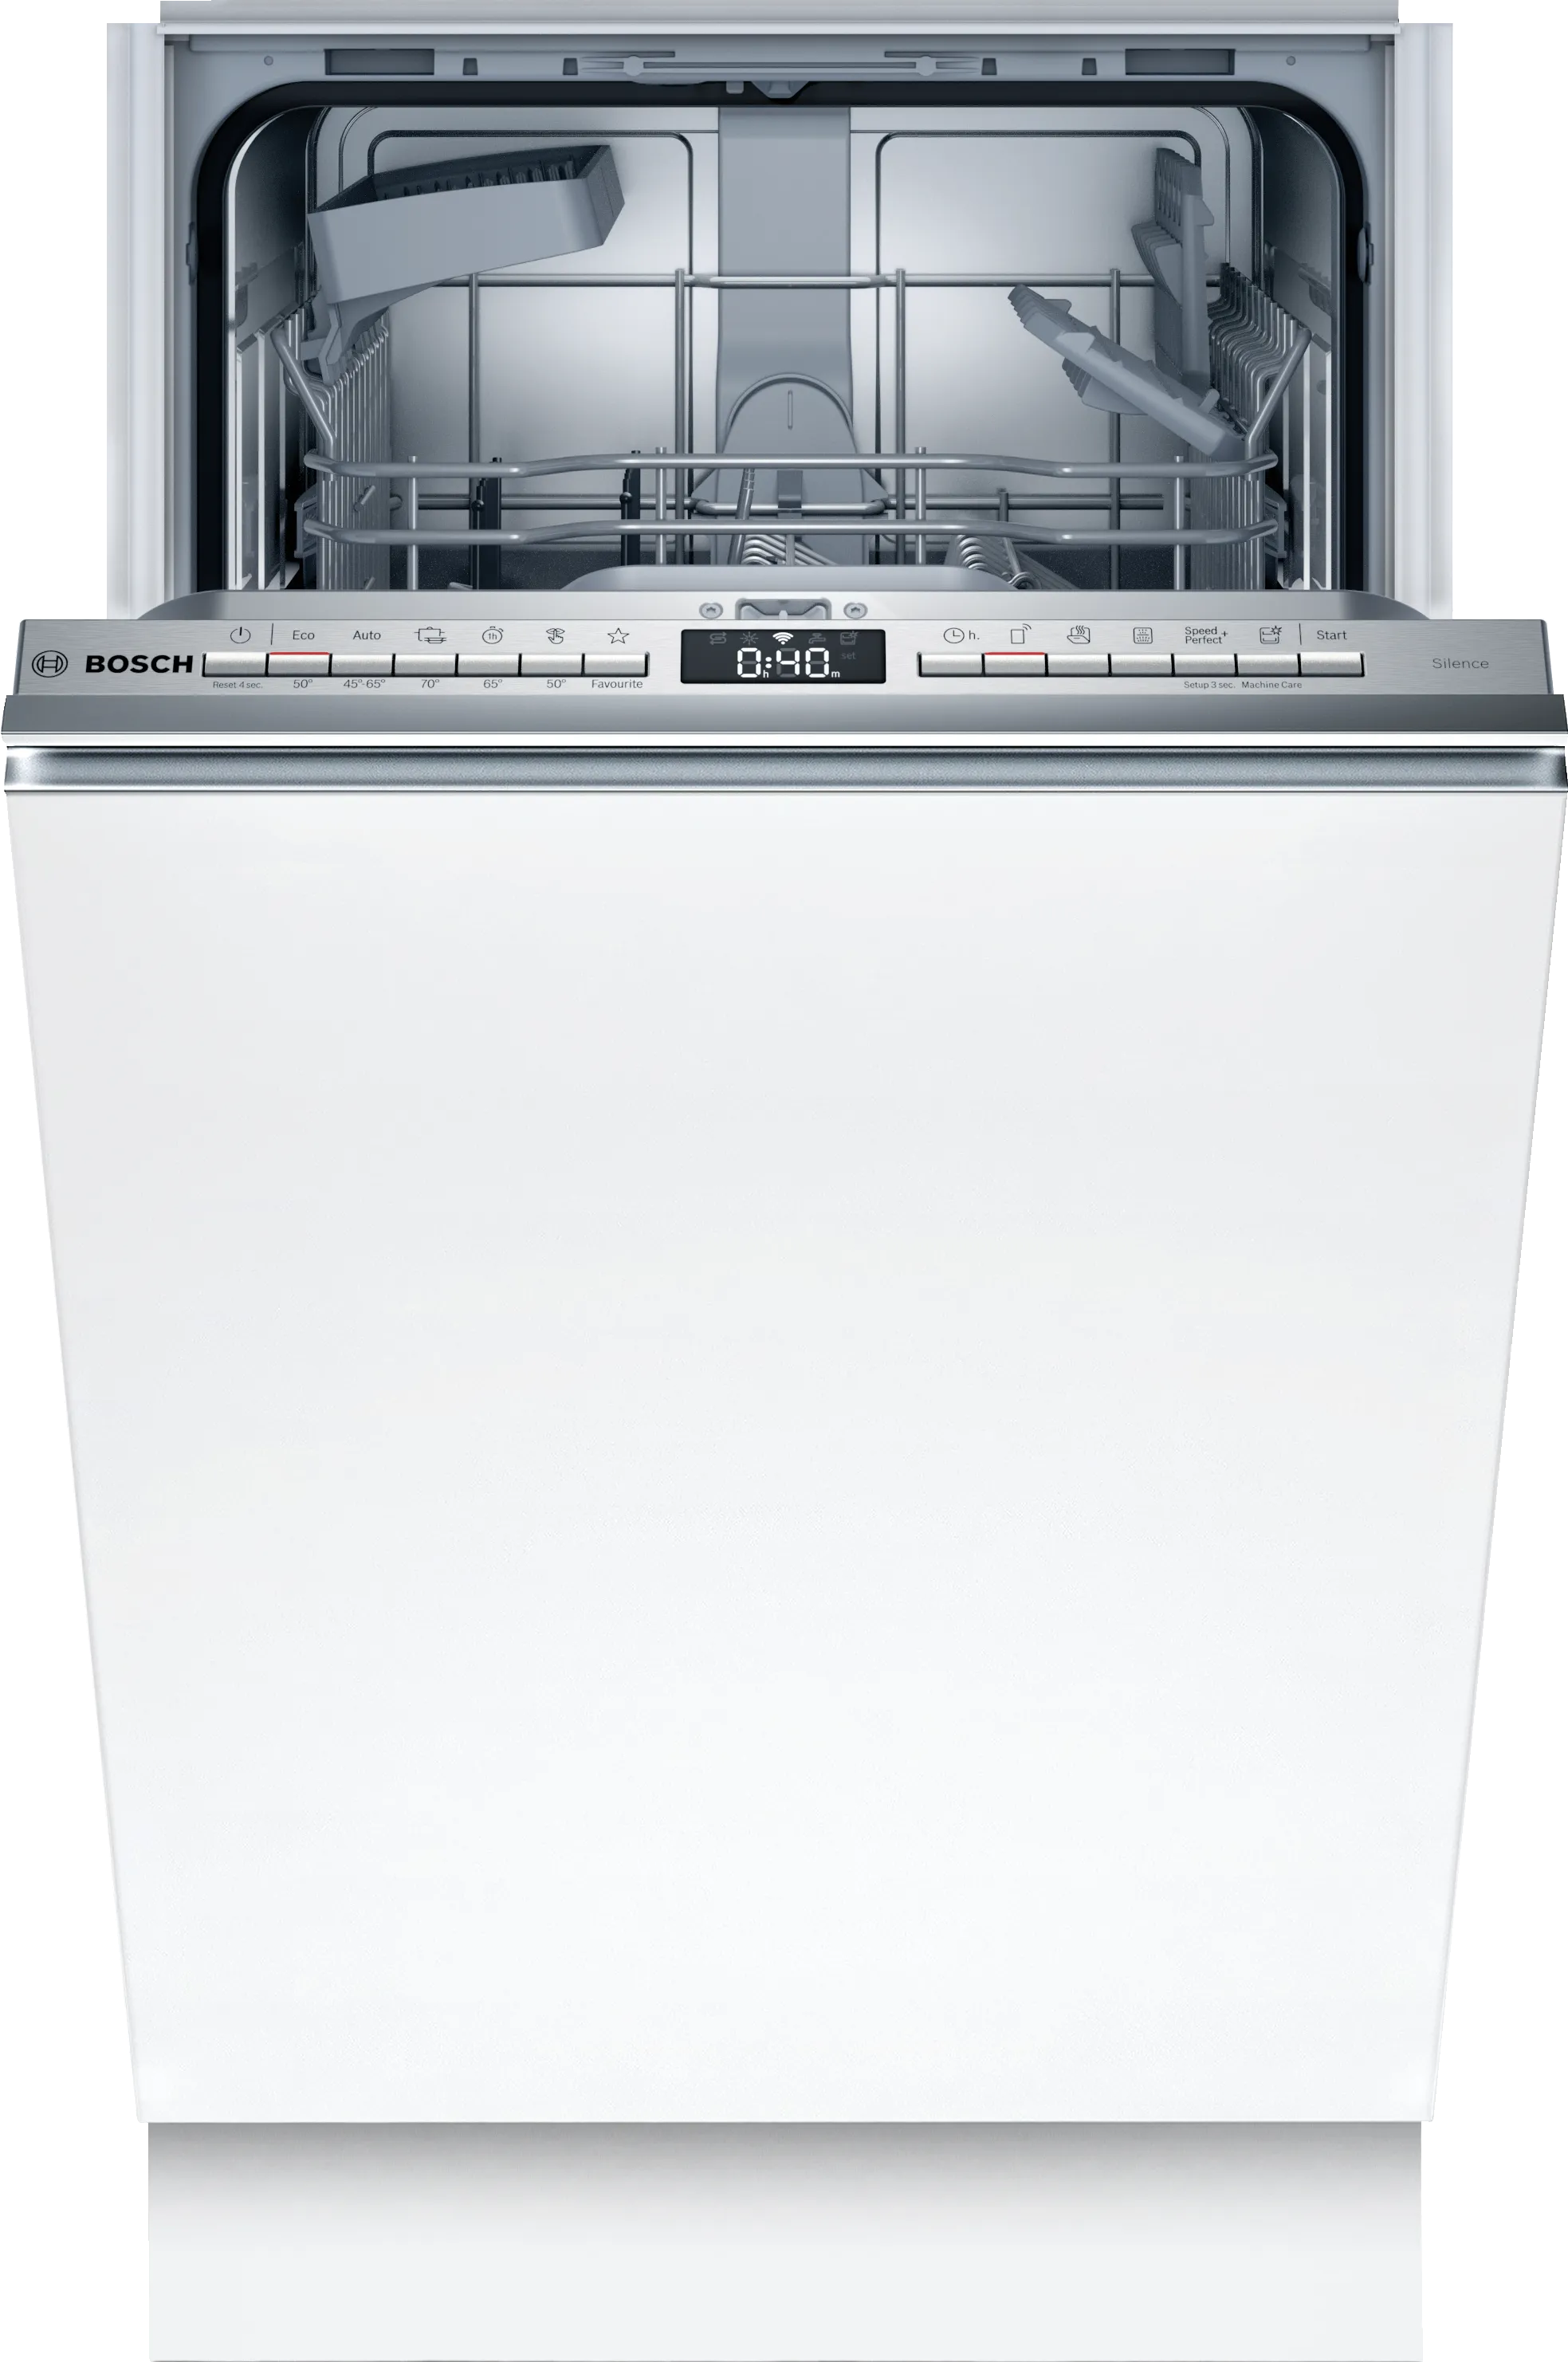 Series 4 fully-integrated dishwasher 45 cm 